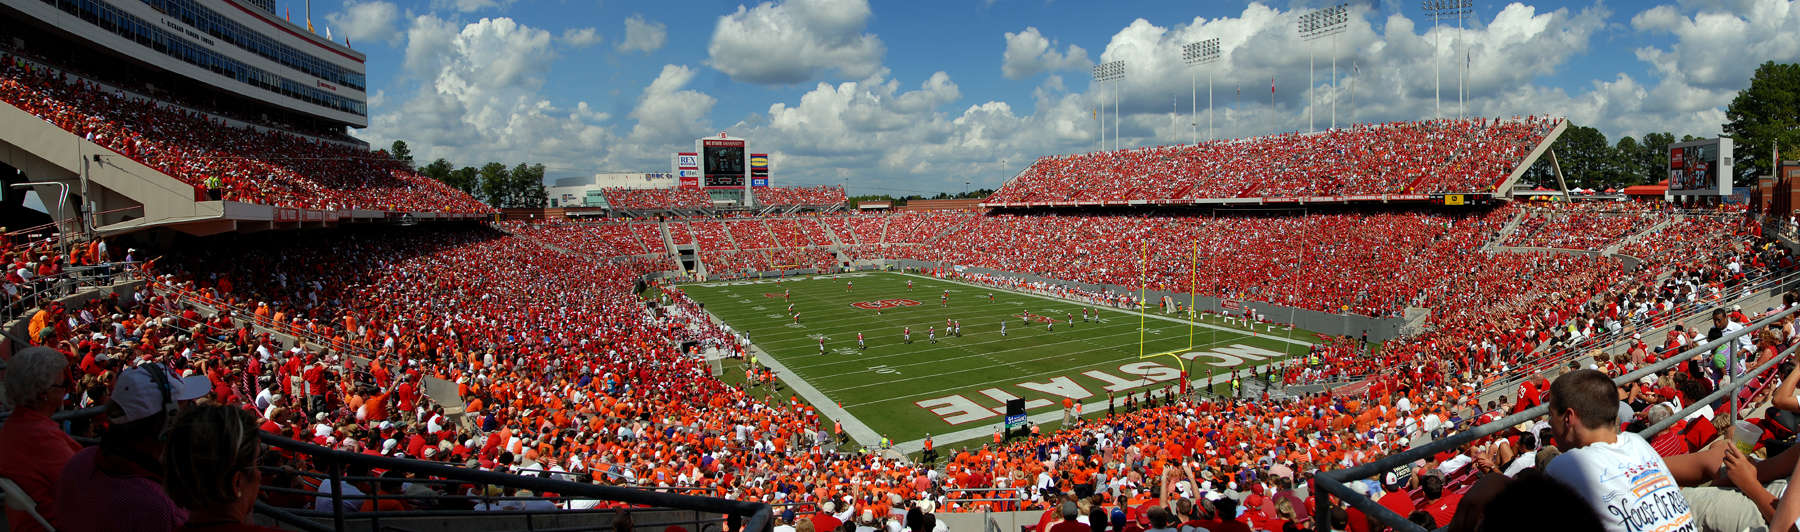 Fans packed into the stands create a sea of red in Carter-Finley Stadium